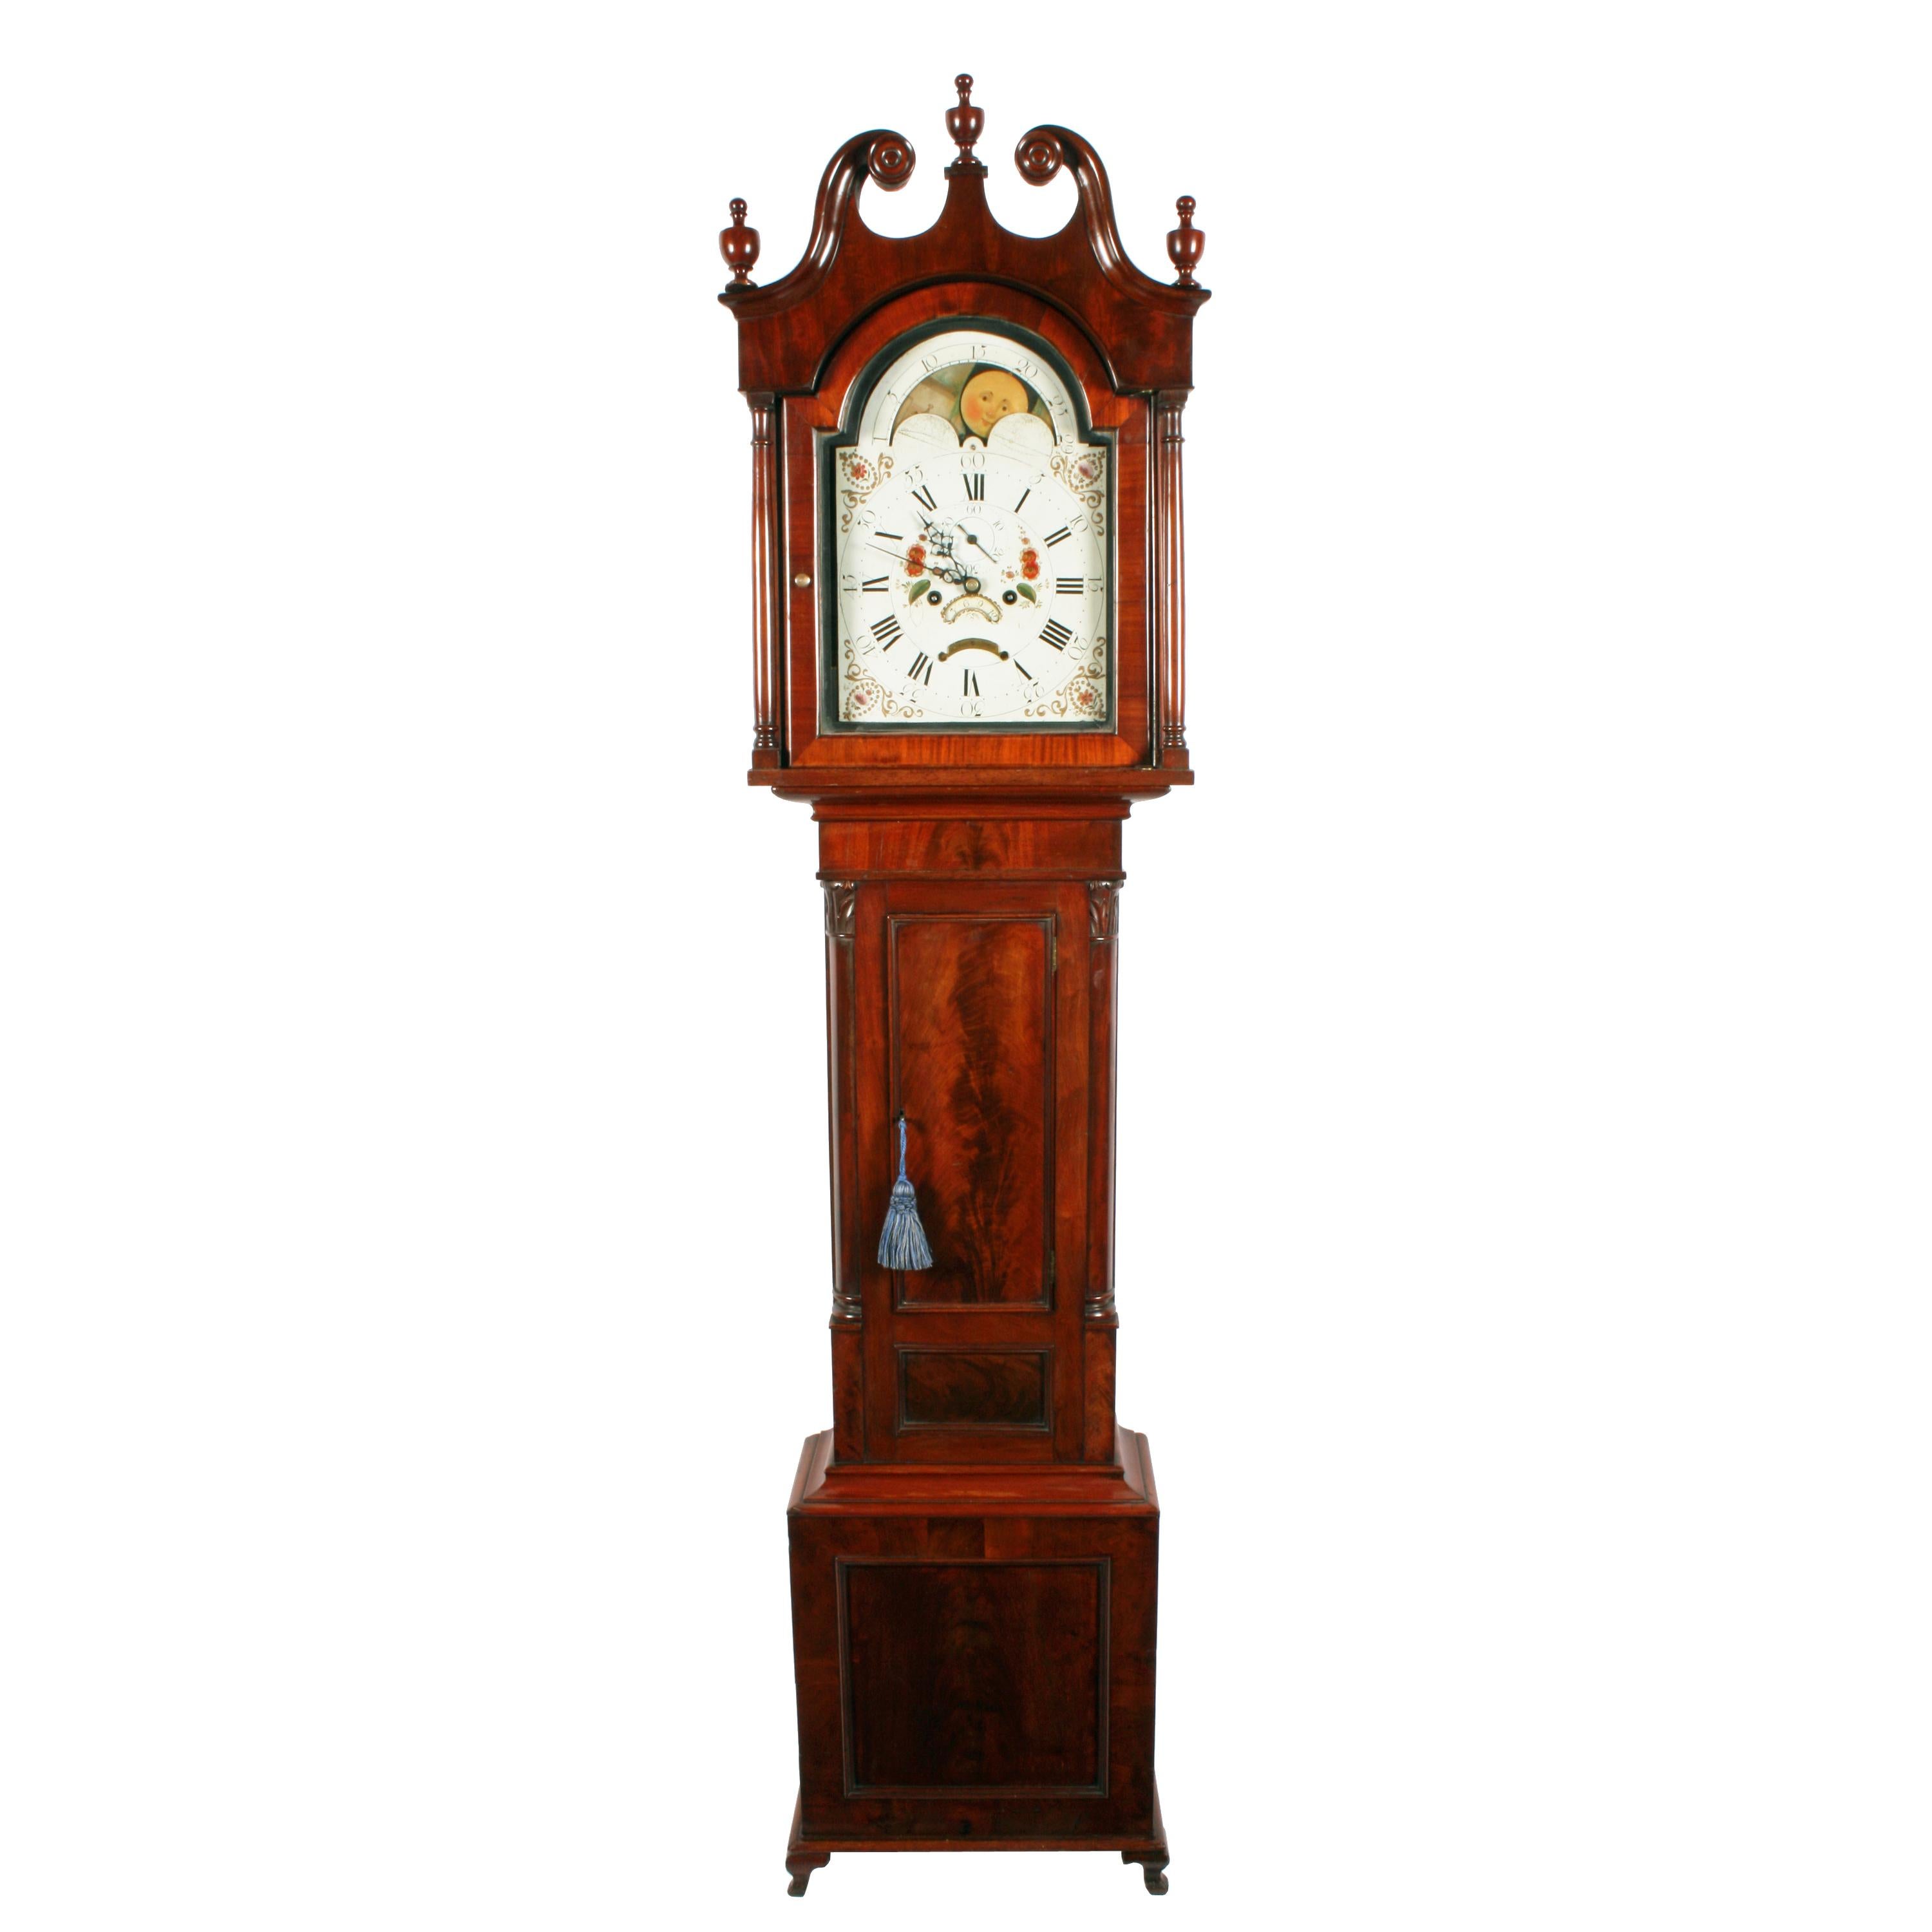 Rolling moon dial Grandfather clock.

A middle of the 19th century early Victorian mahogany cased Grandfather clock.

The clock has a painted rolling moon dial and eight day works that strike hourly on a bell.

The rolling moon at the top of